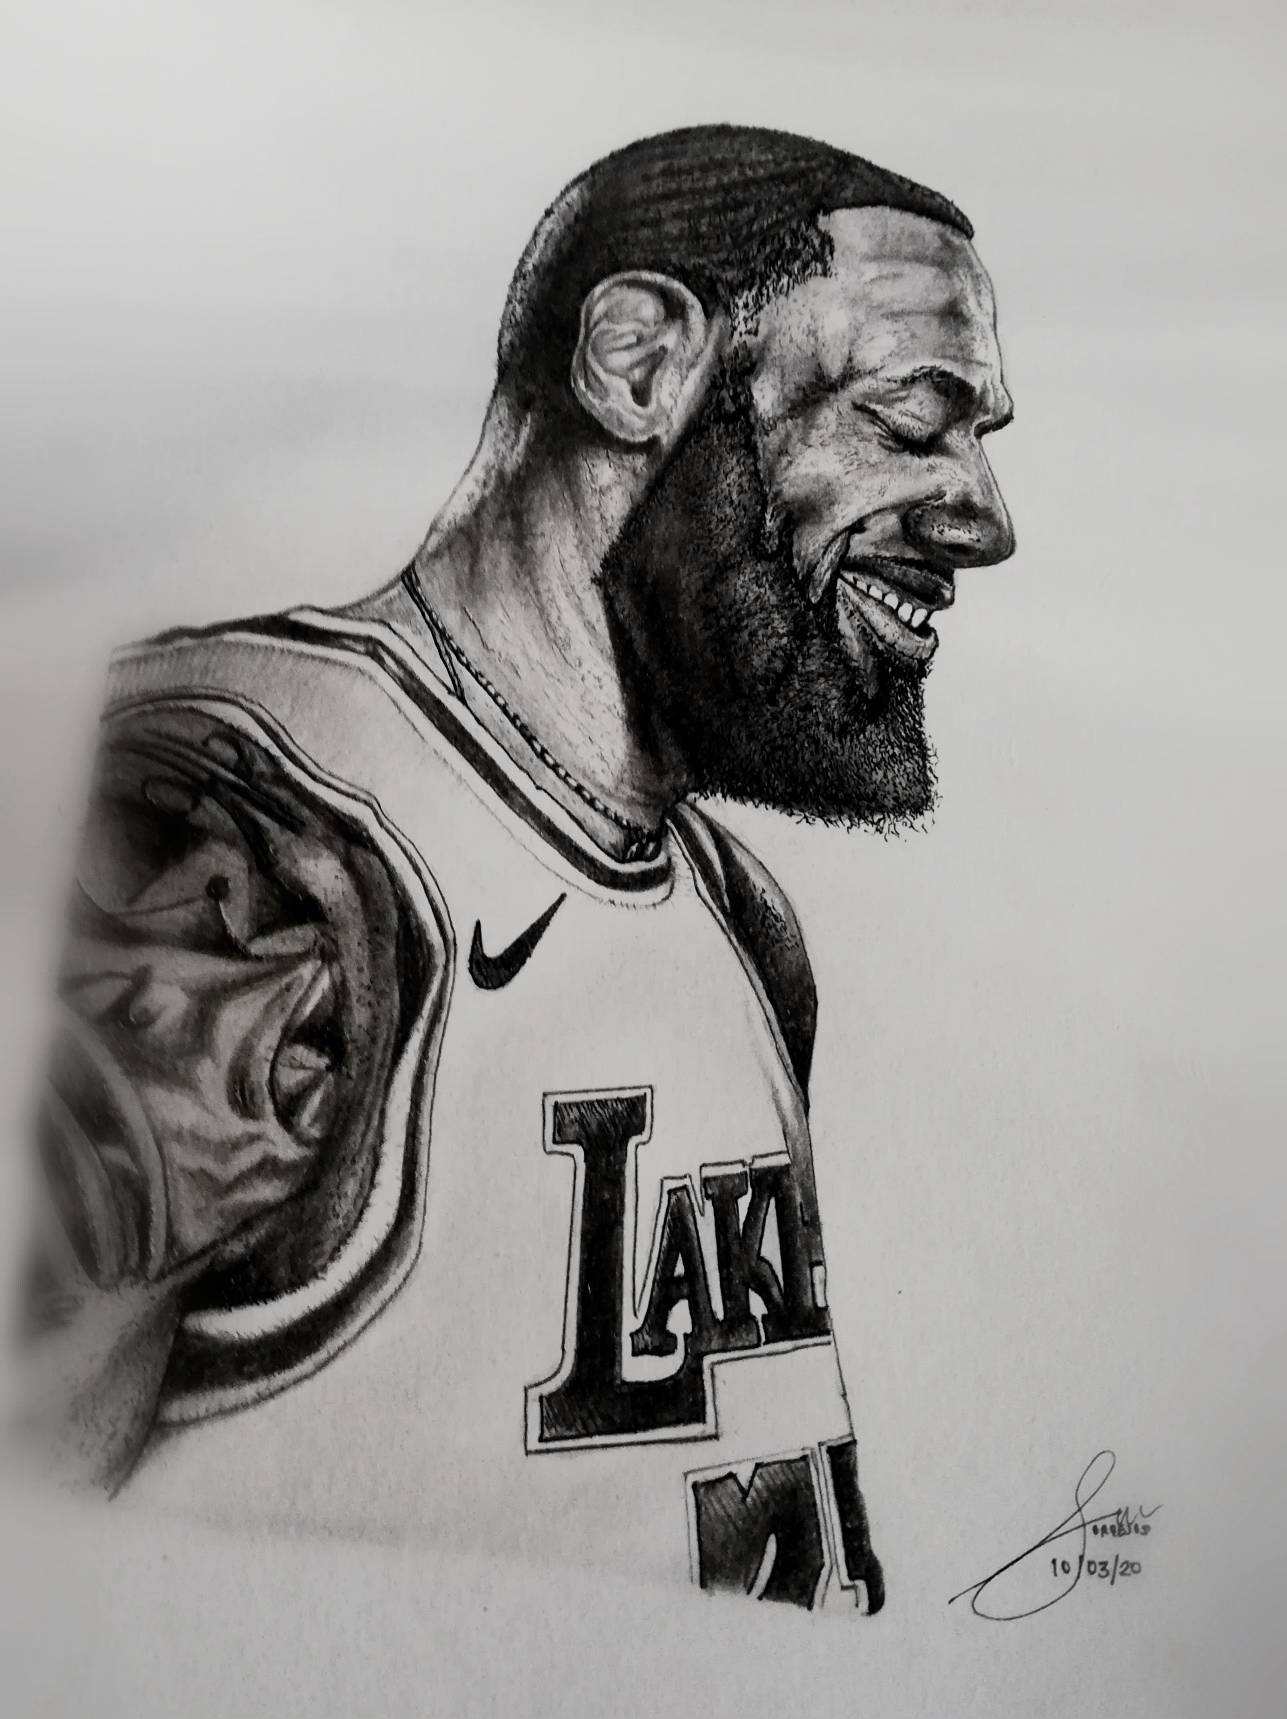 ORDER NOW The KING Lebron James T-shirt by MolkiStore on DeviantArt